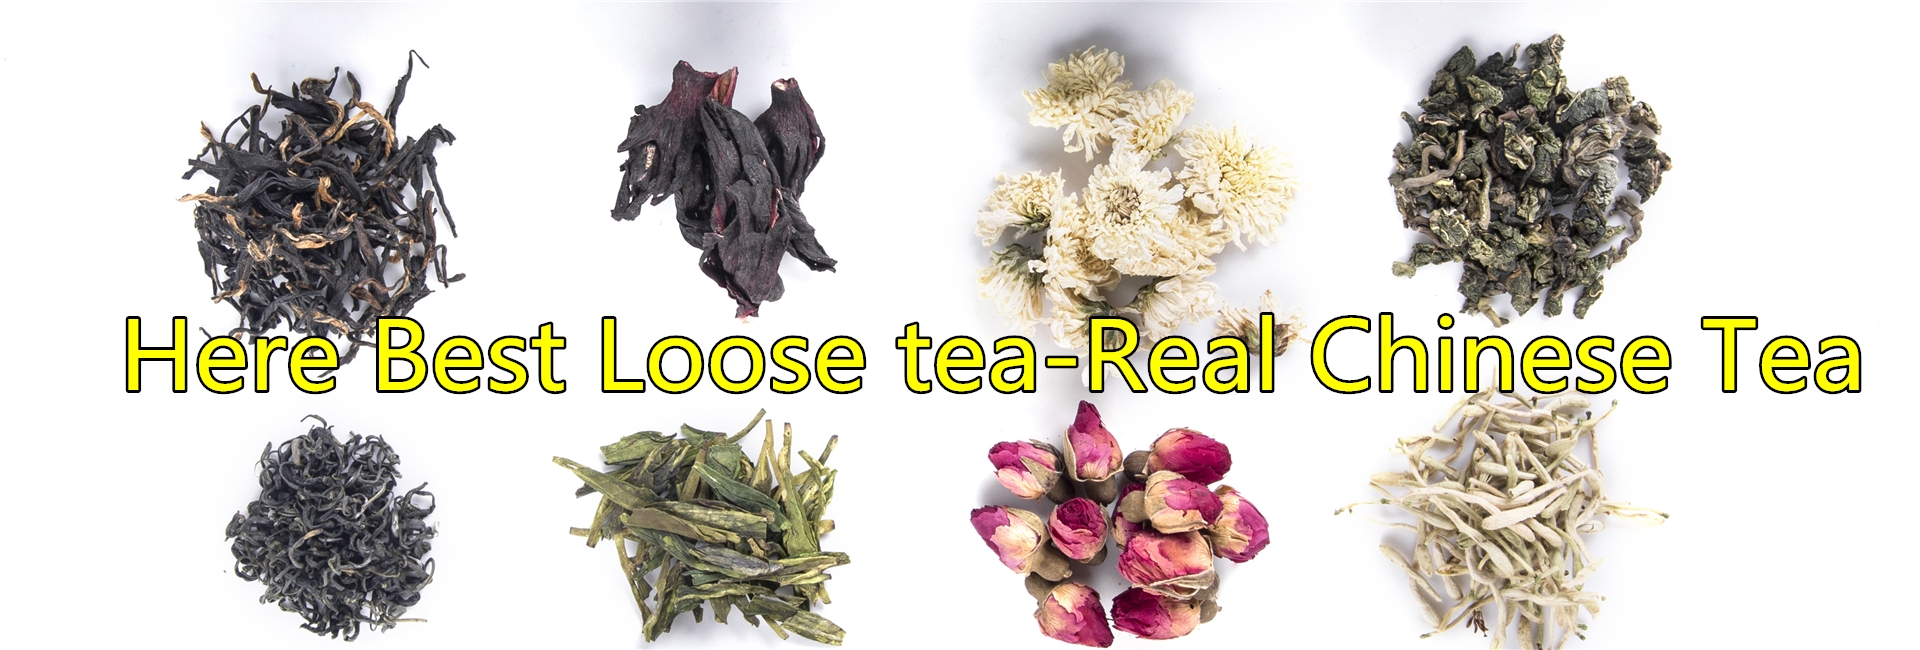 Real Chinese tea-banner3